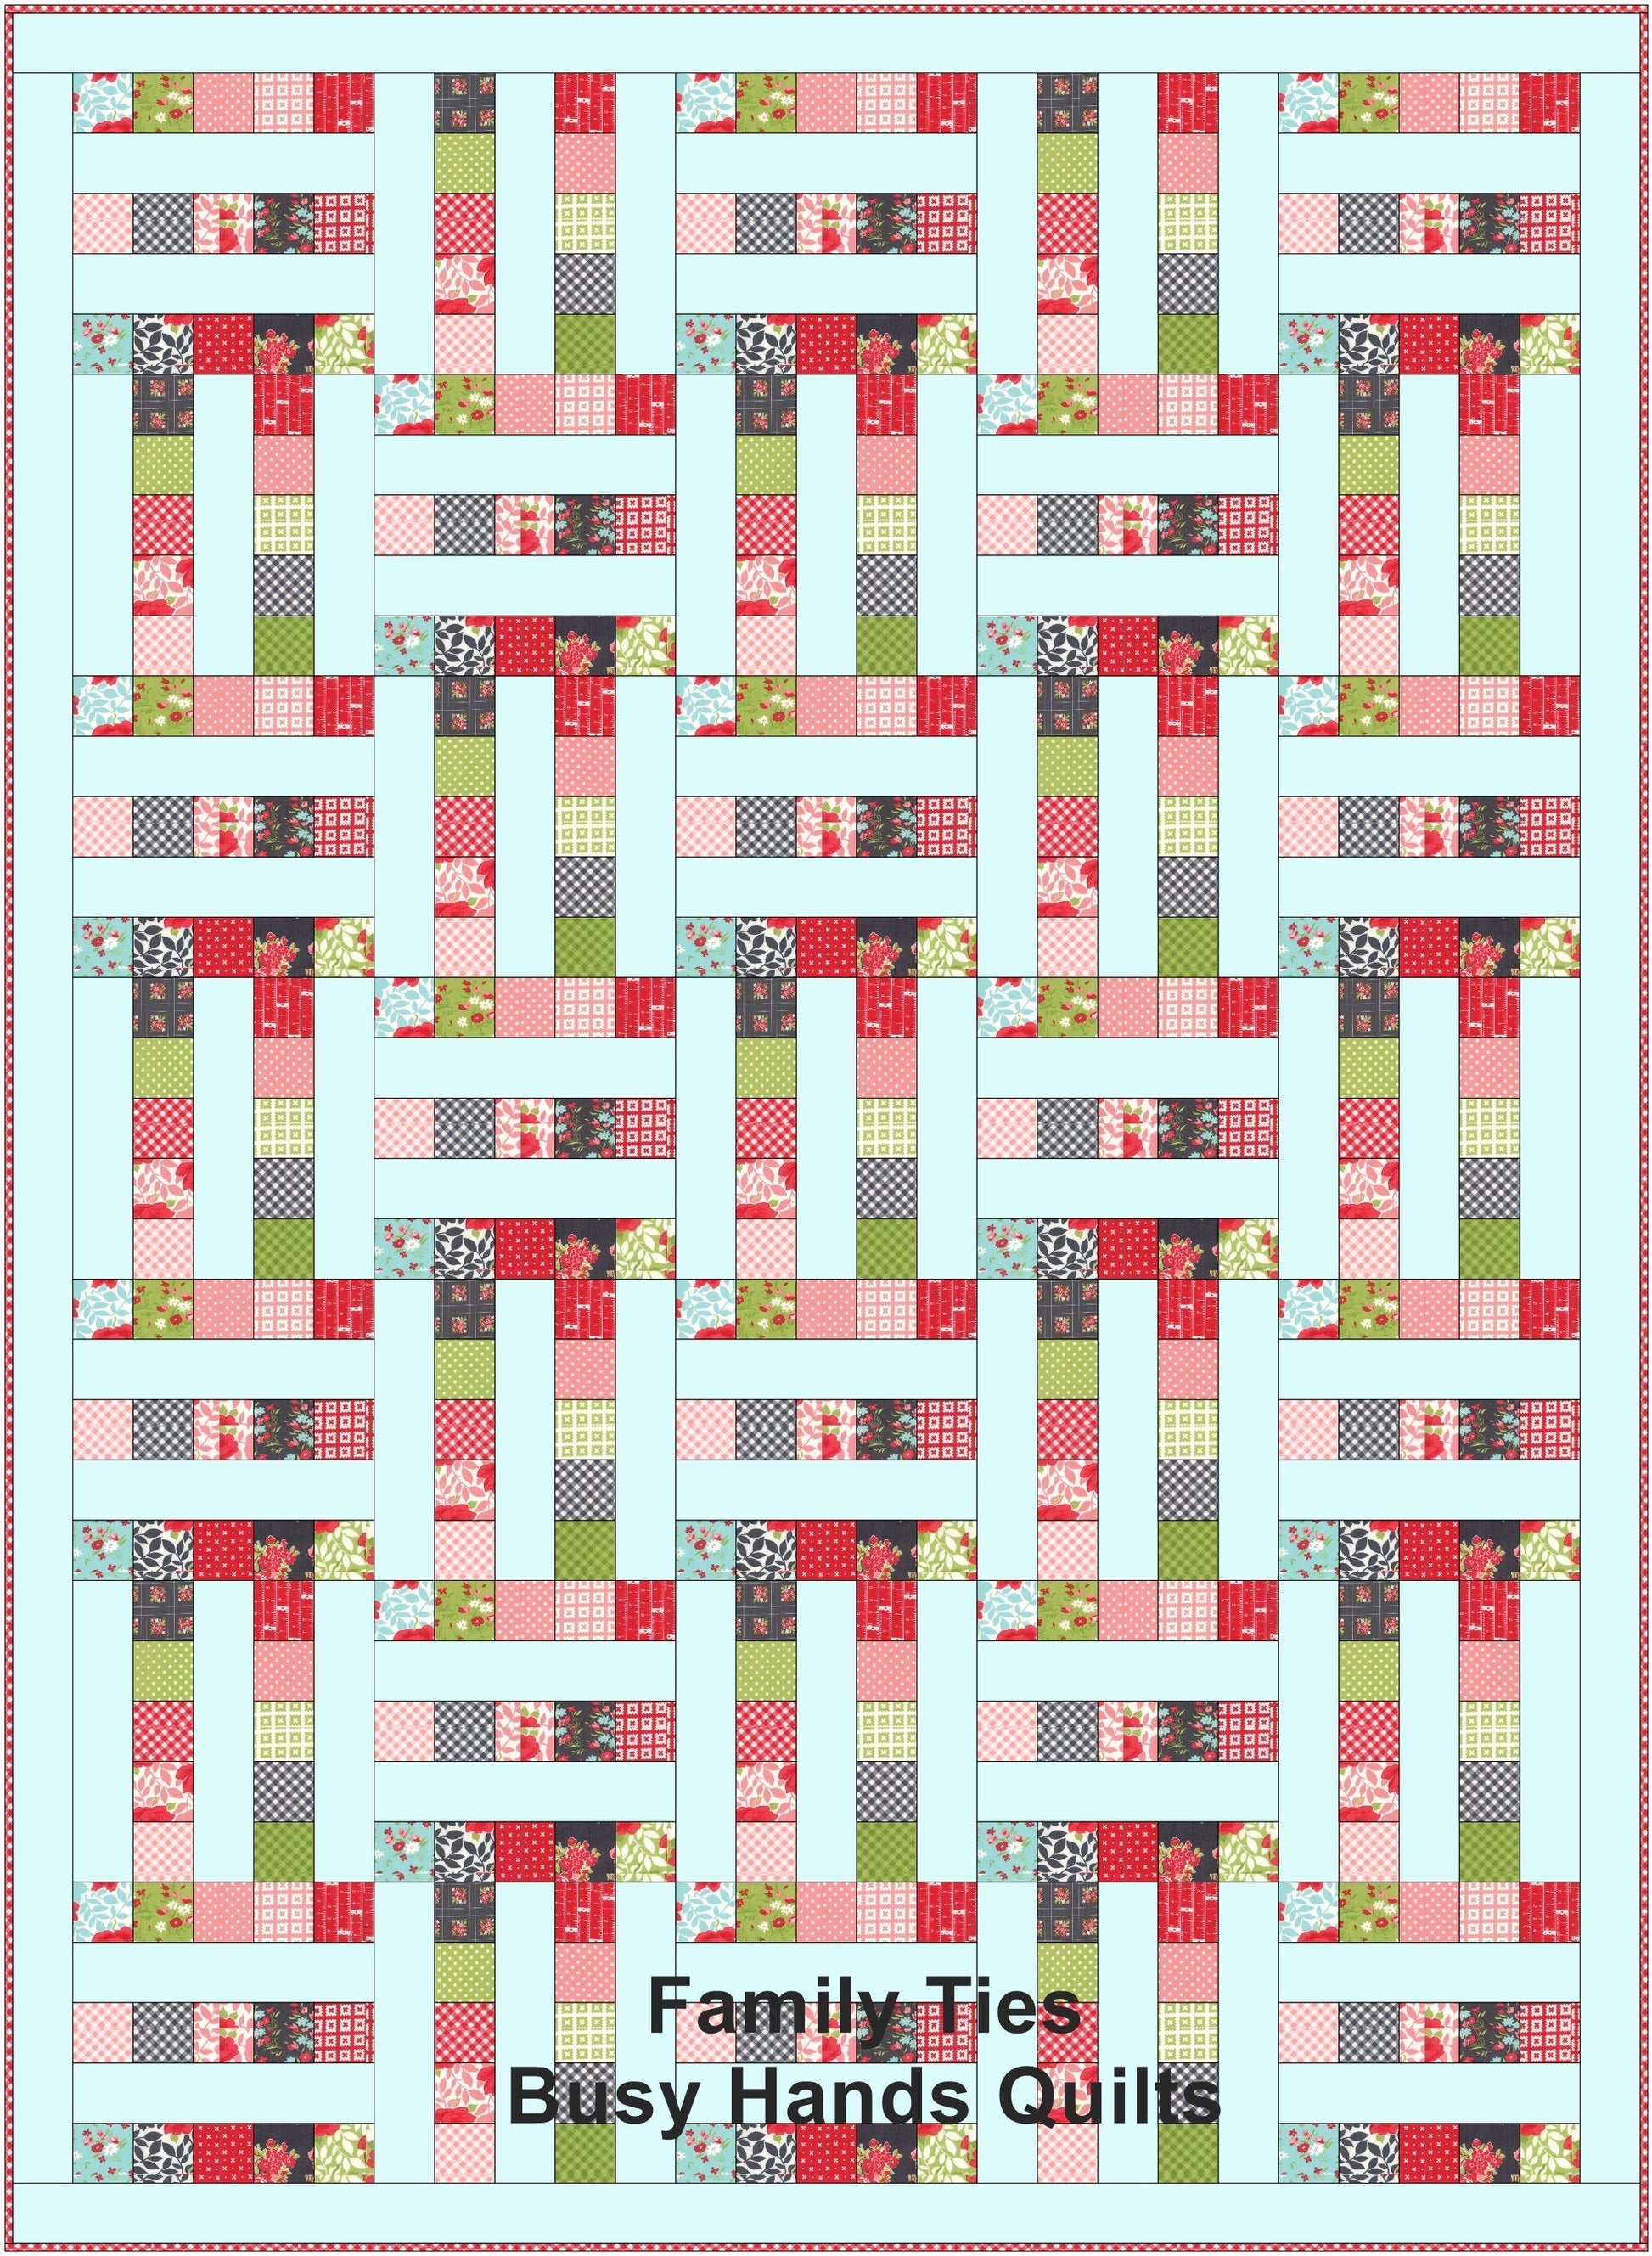 Family Ties Quilt Pattern PRINTED Busy Hands Quilts {$price}